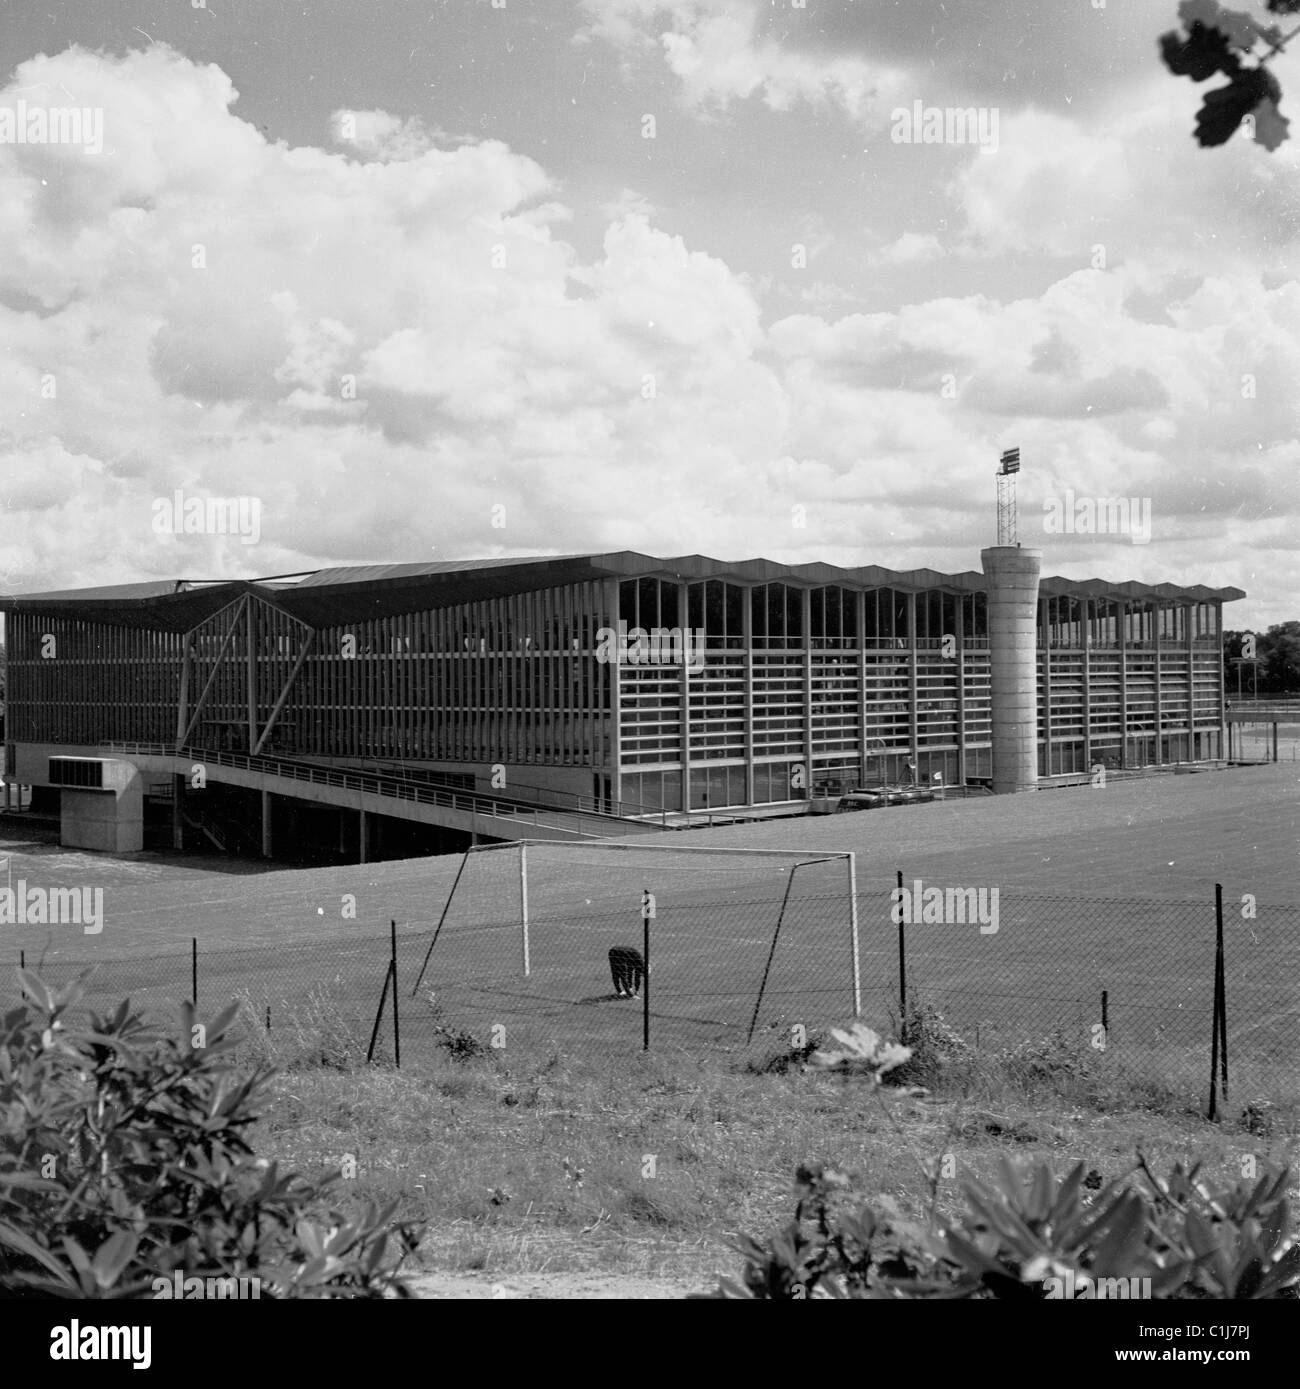 1964, historical, the new indoor sports hall and surrounding football pitches at the National Sports Centre, Crystal Palace, South London, England. Stock Photo